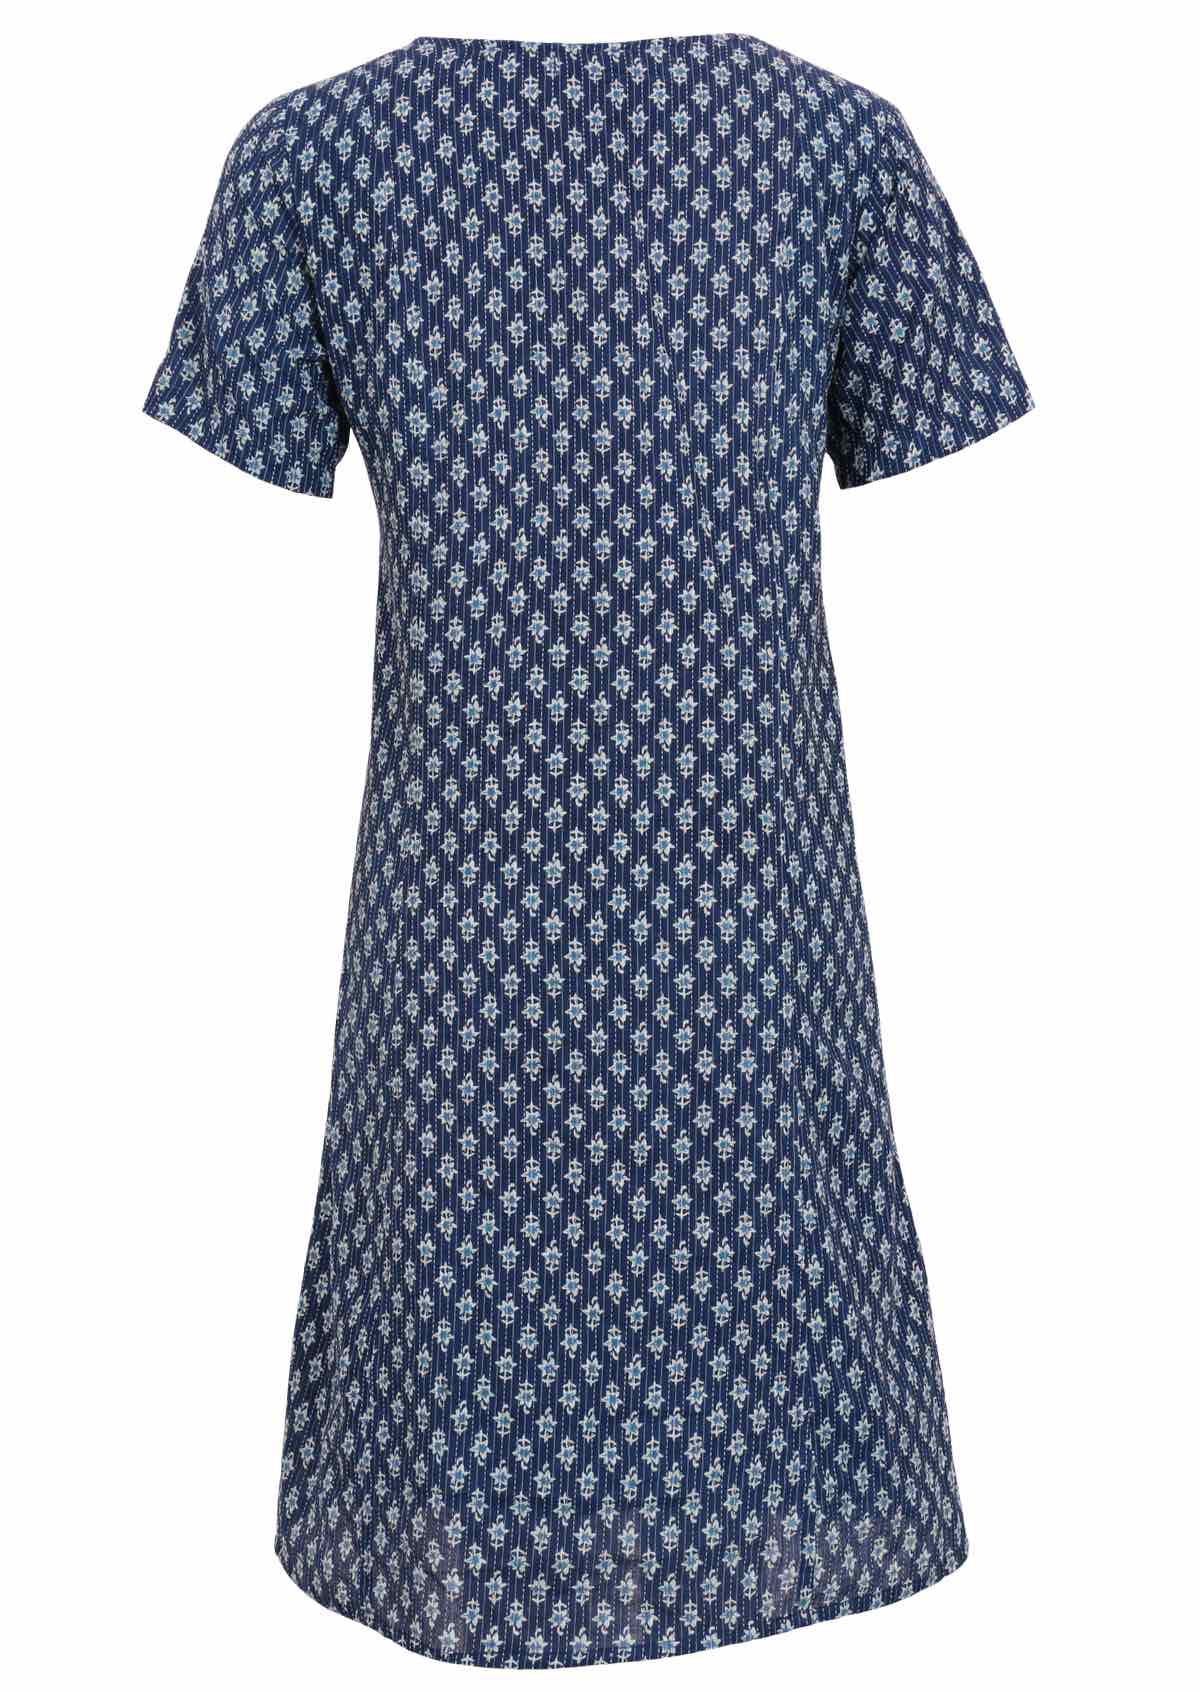 100% cotton dress is fully lines and sits below the knee. 